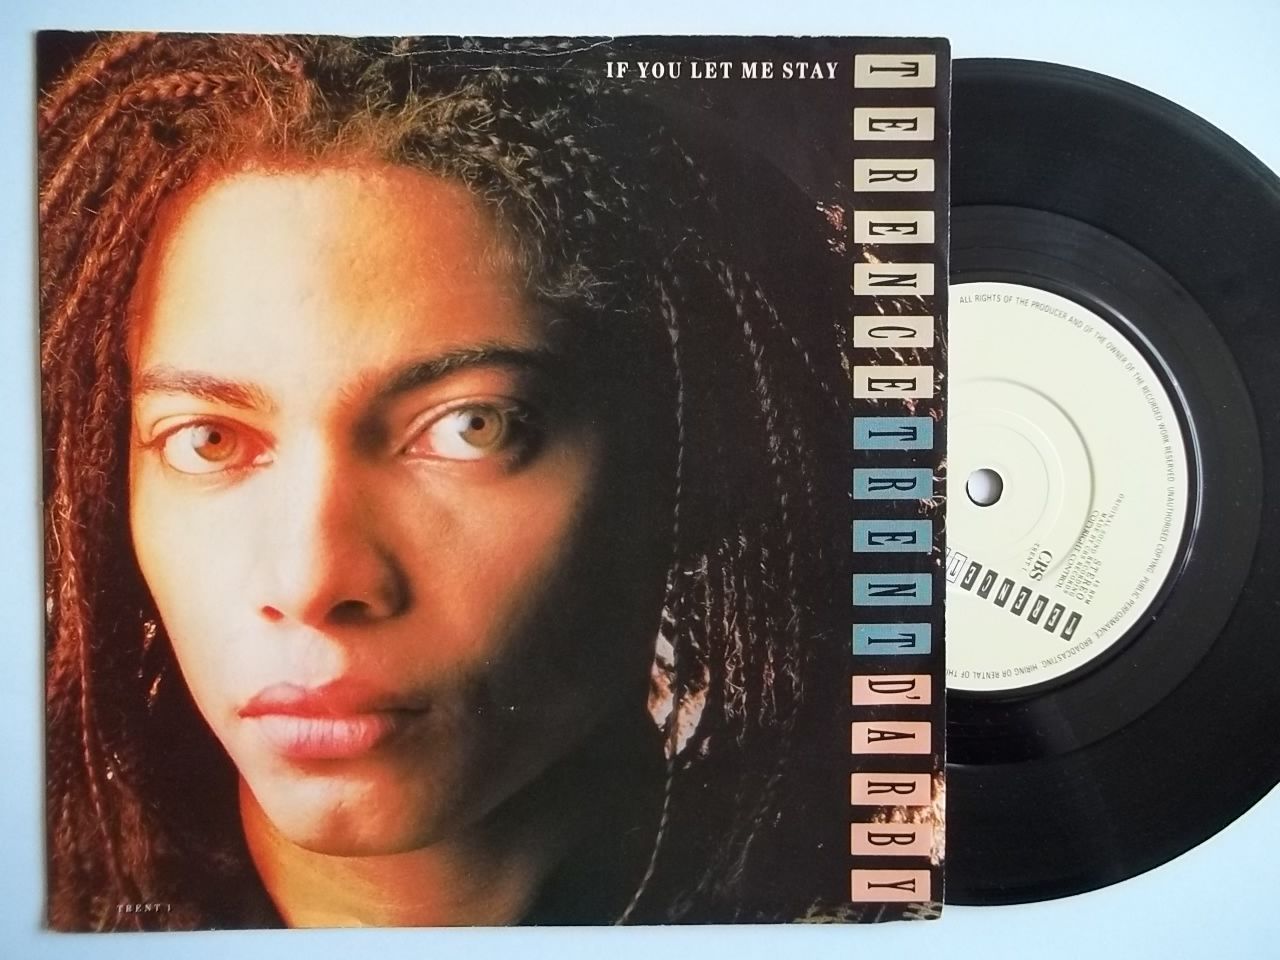 Terence Trent D'arby If You Let Me Stay Records, LPs, Vinyl and CDs ...